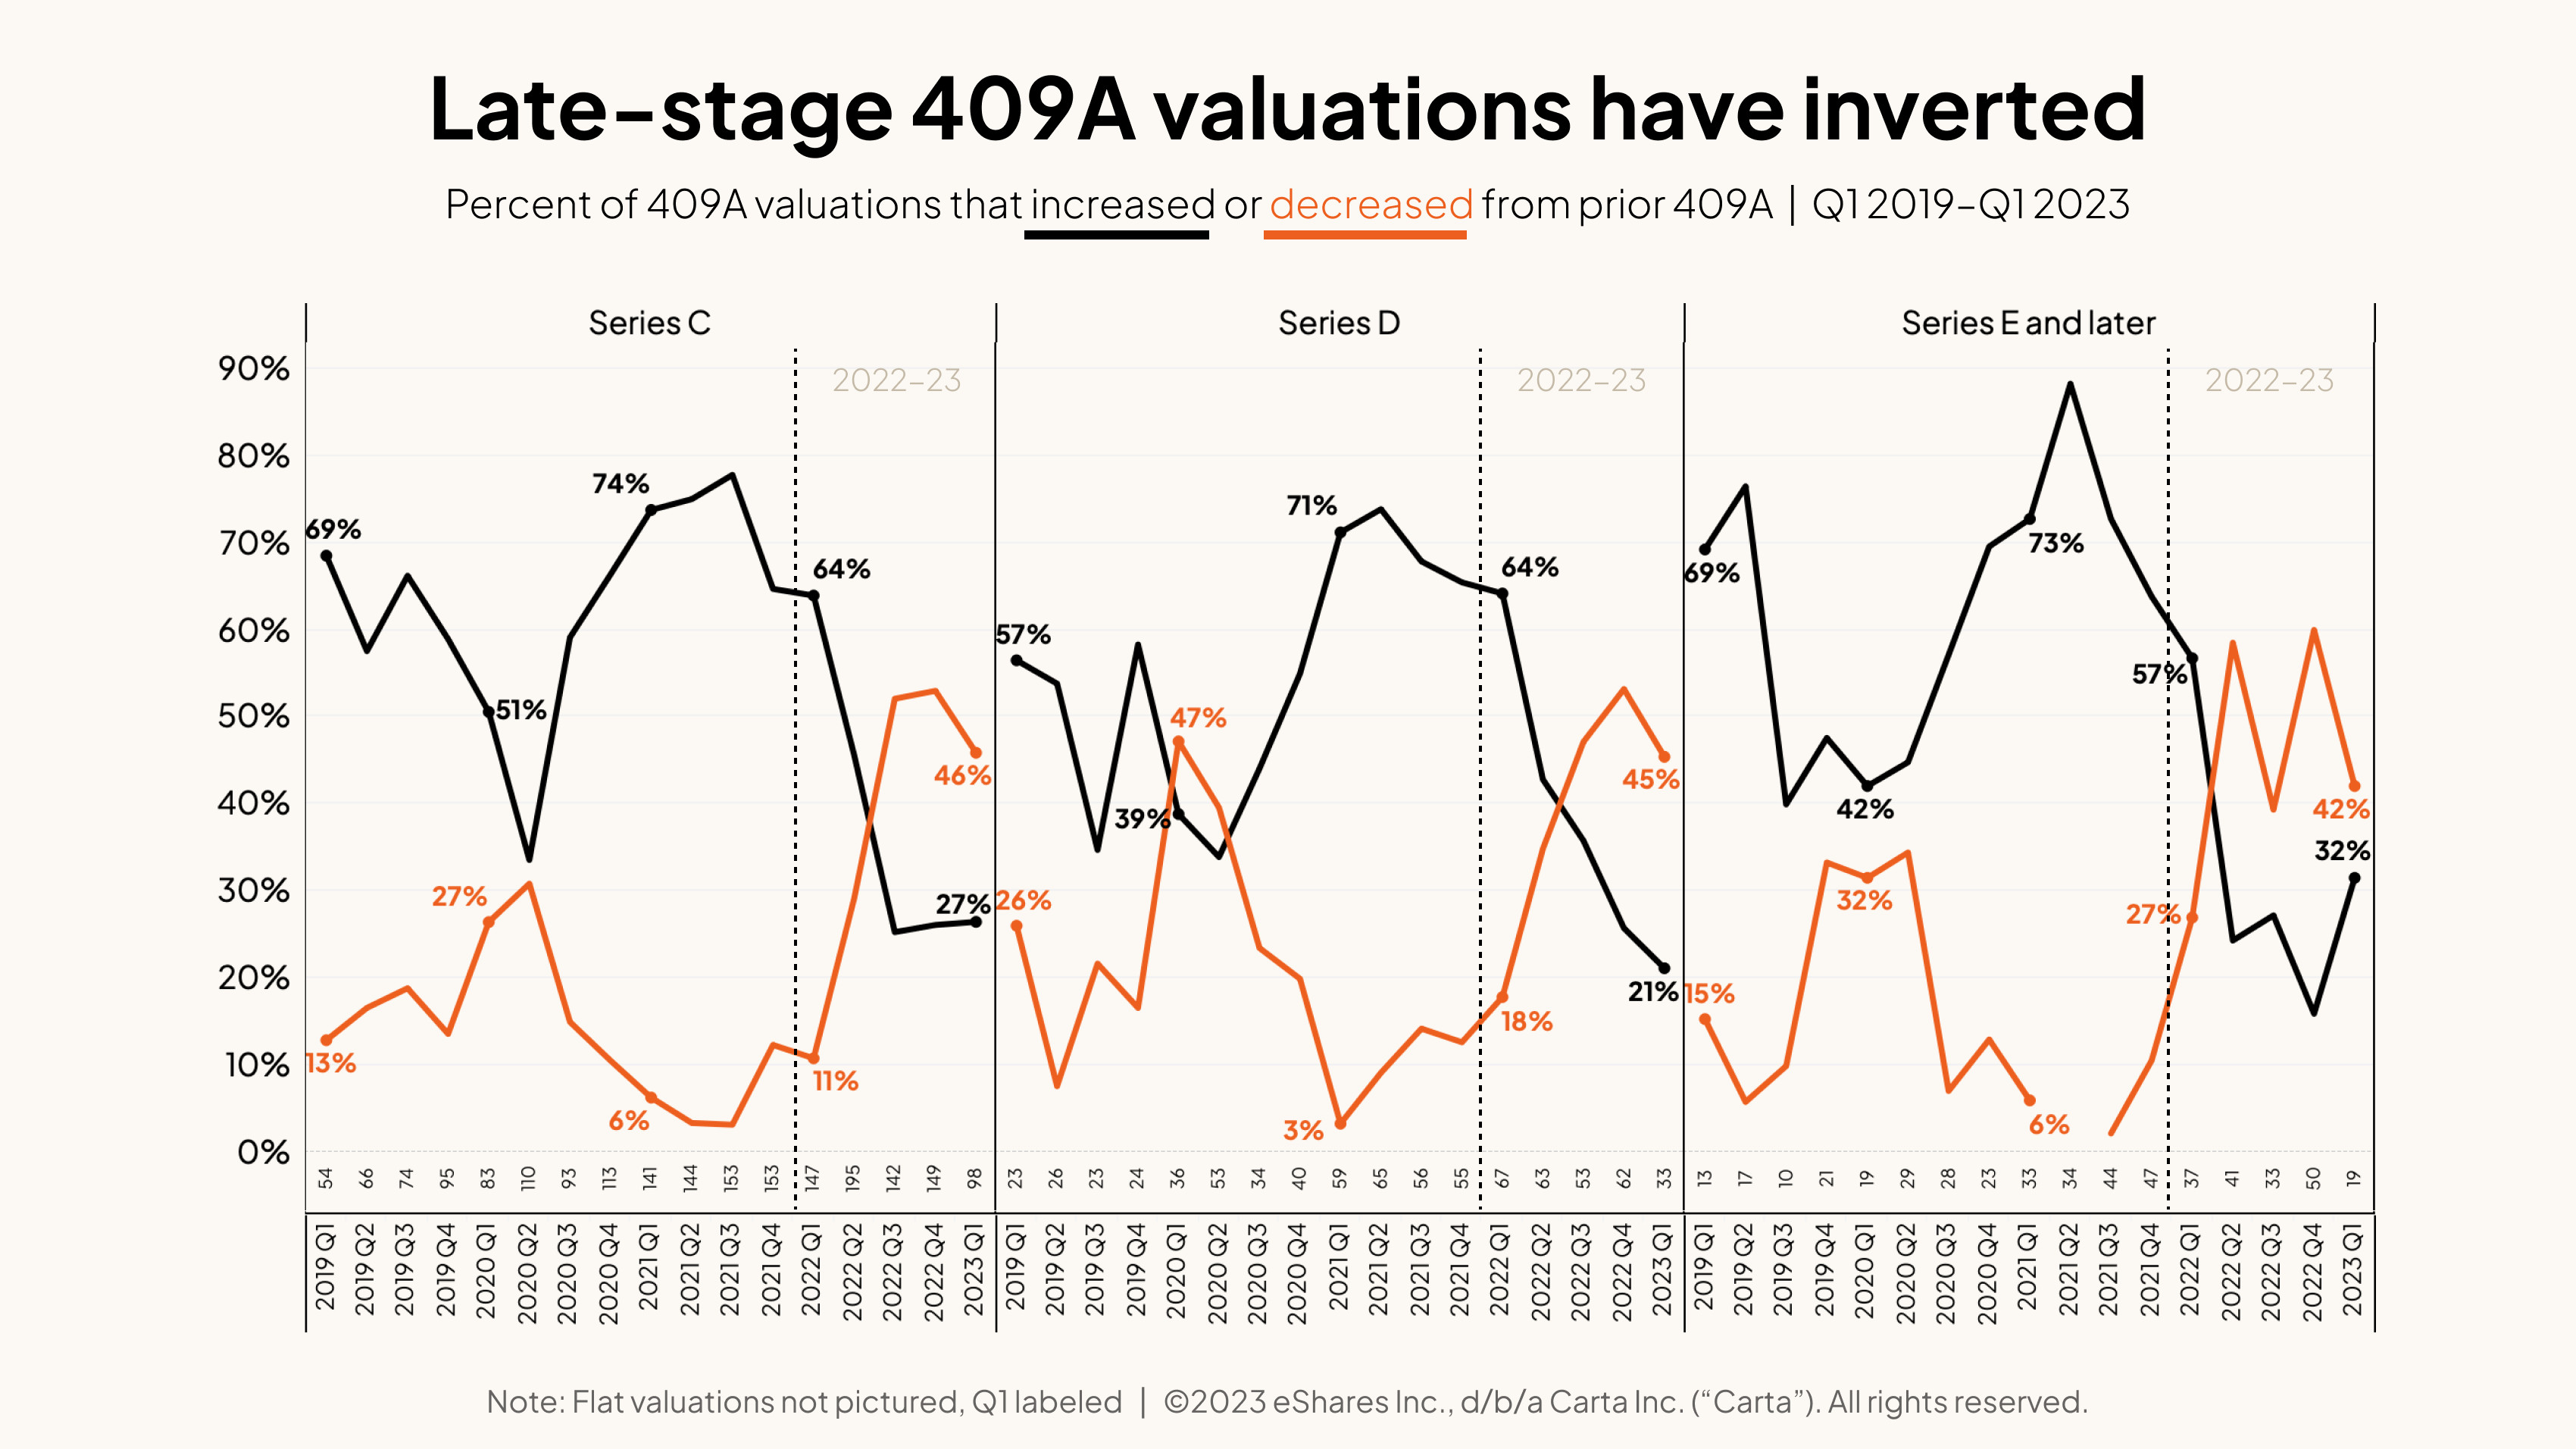 Late-stage 409A valuations have inverted